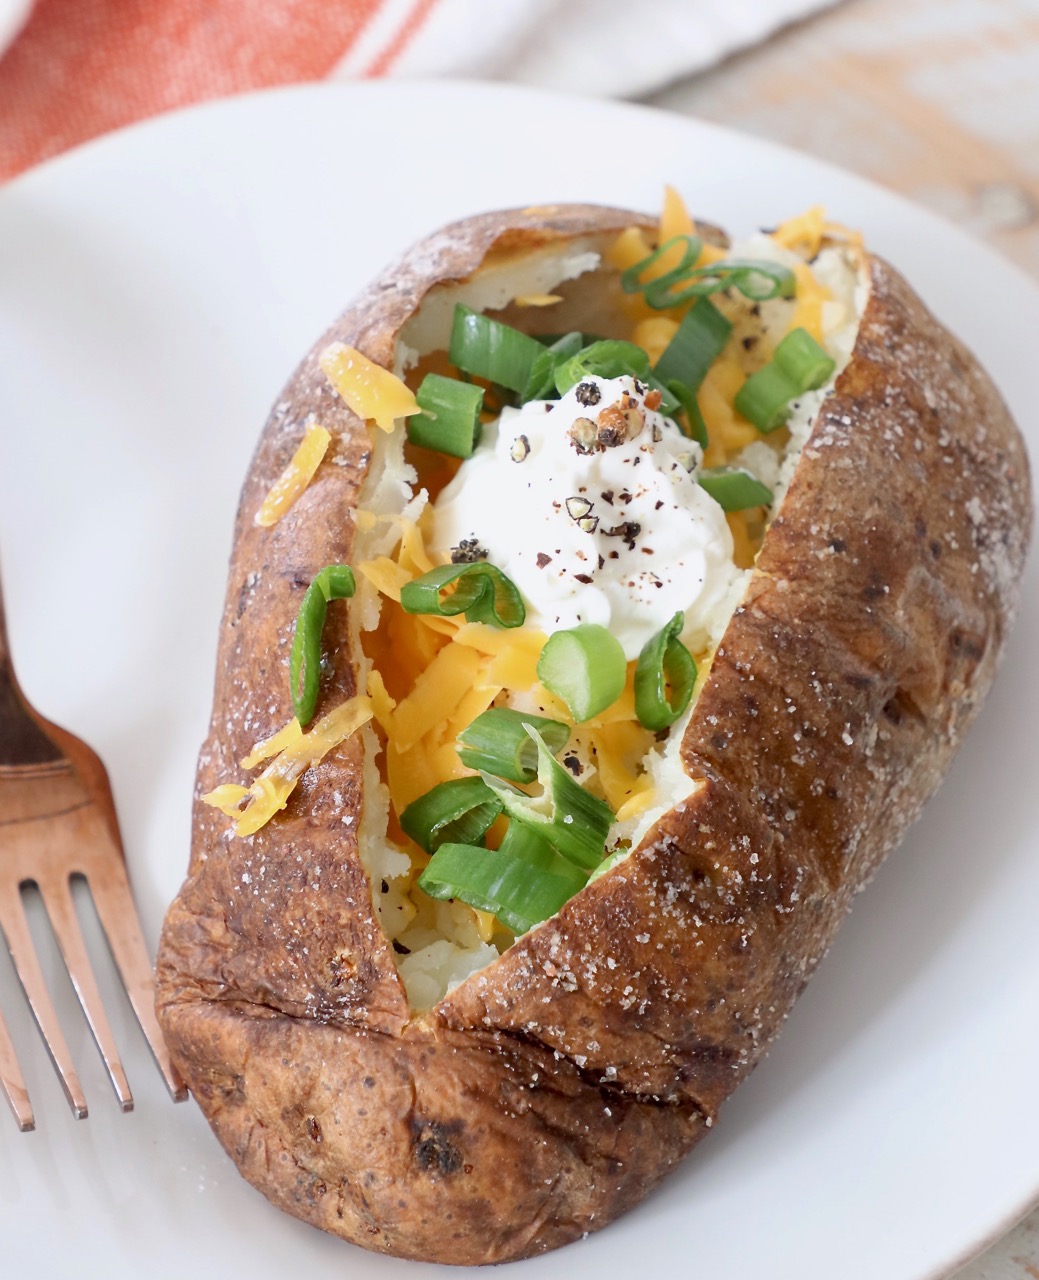 baked potato on plate filled with diced green onions, cheese and sour cream